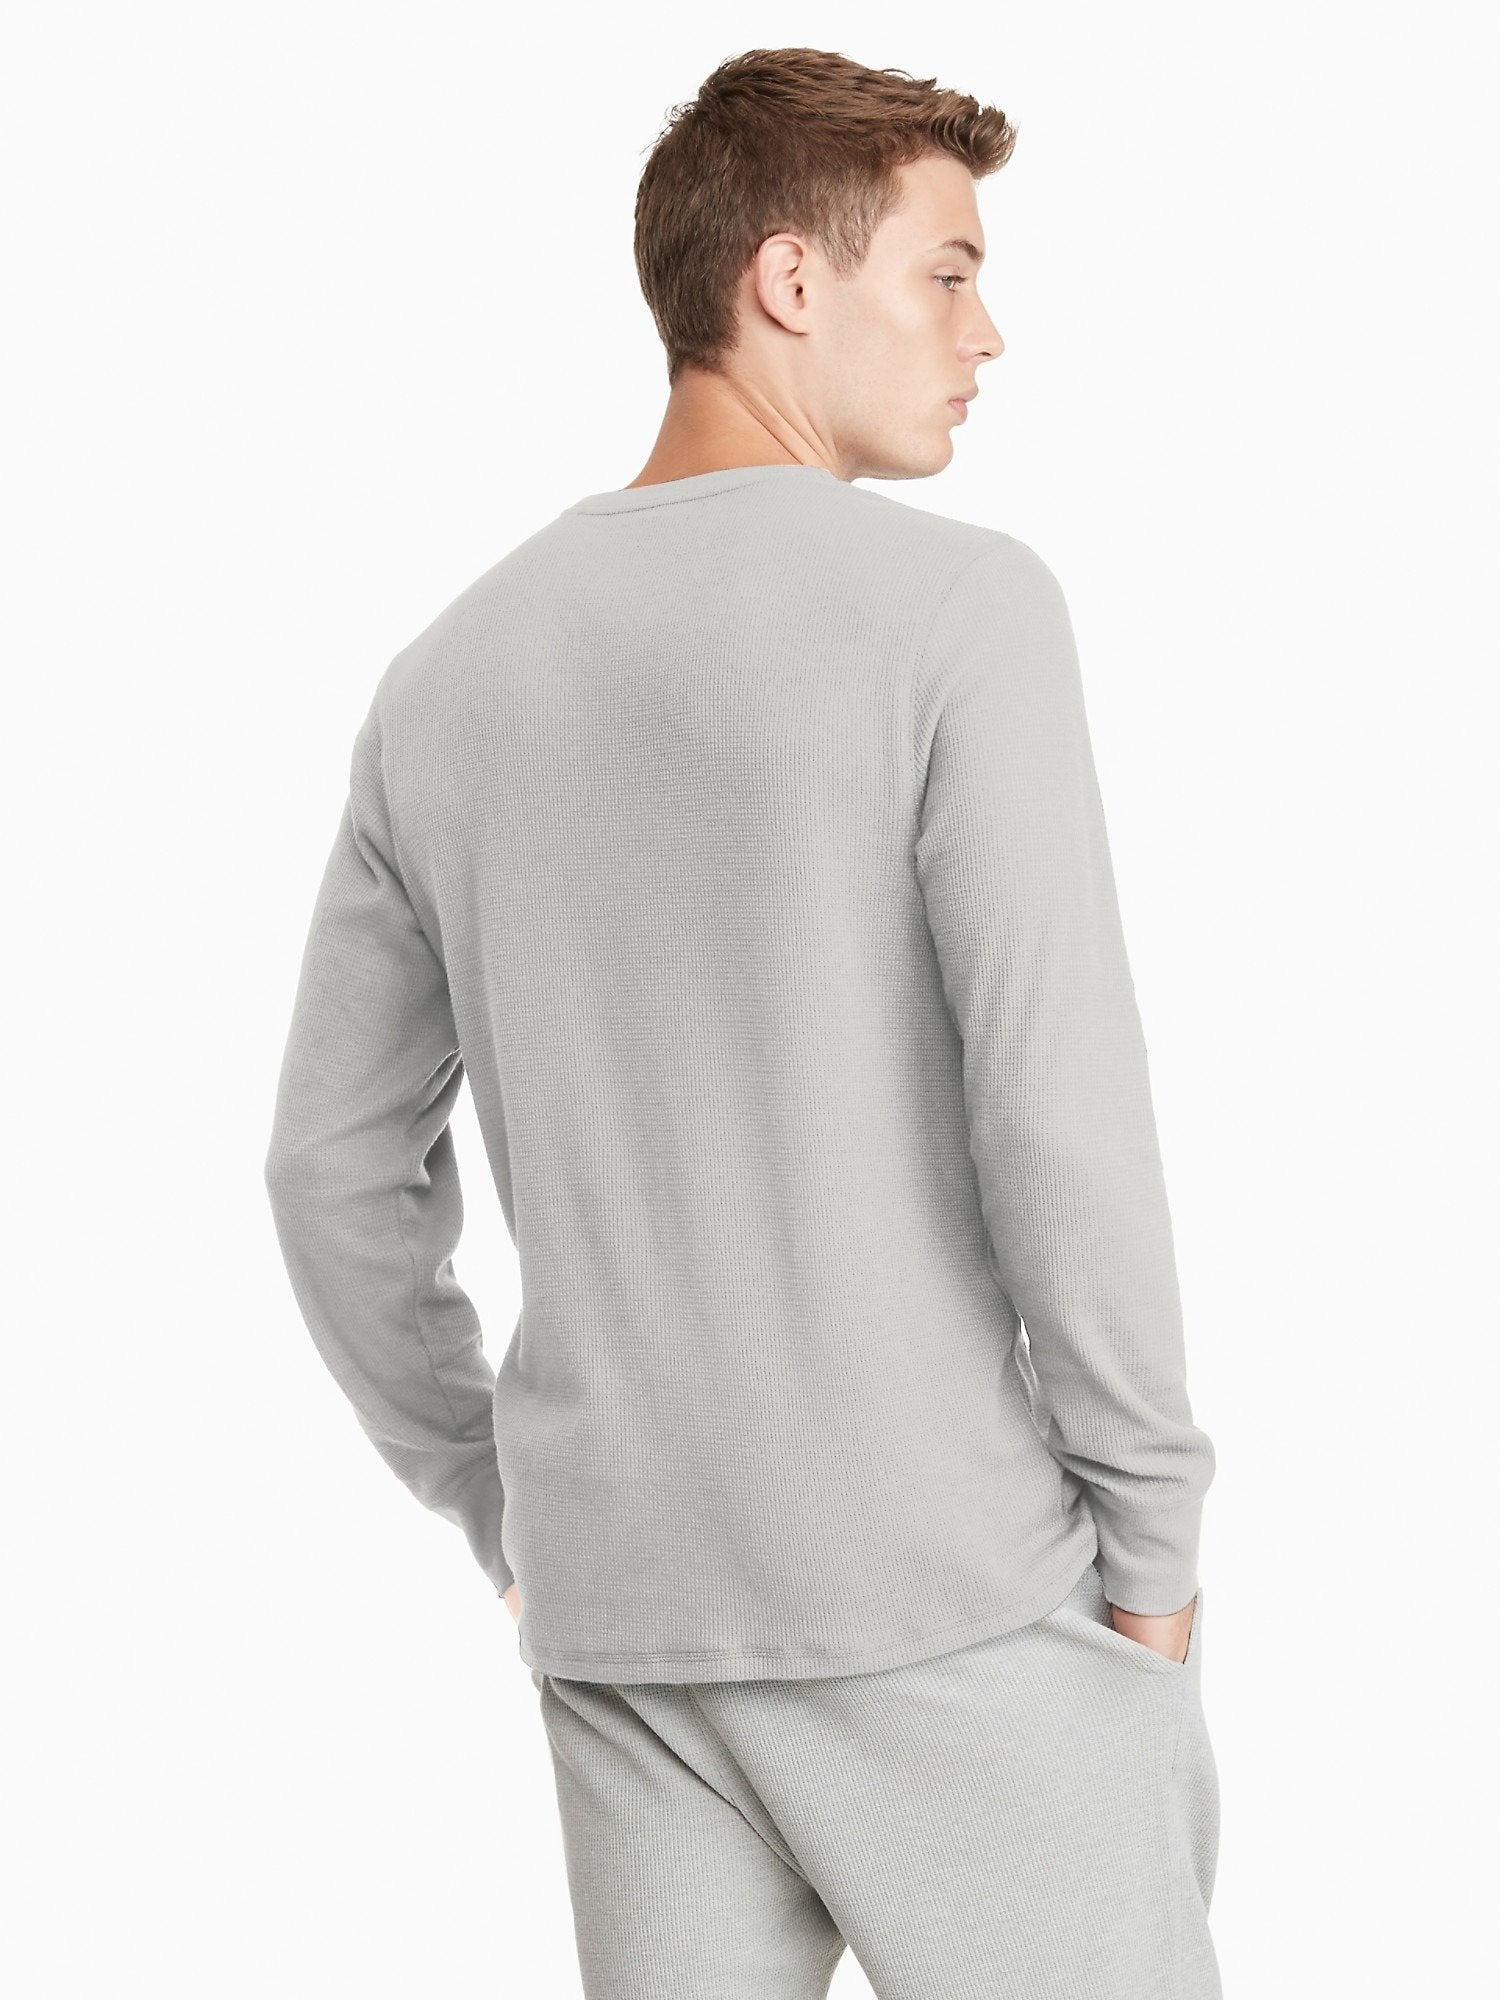 Tommy Hilfiger Mens Thermal Sleep Long Sleeve Henley Neck Grey Heather 09T4076 004.